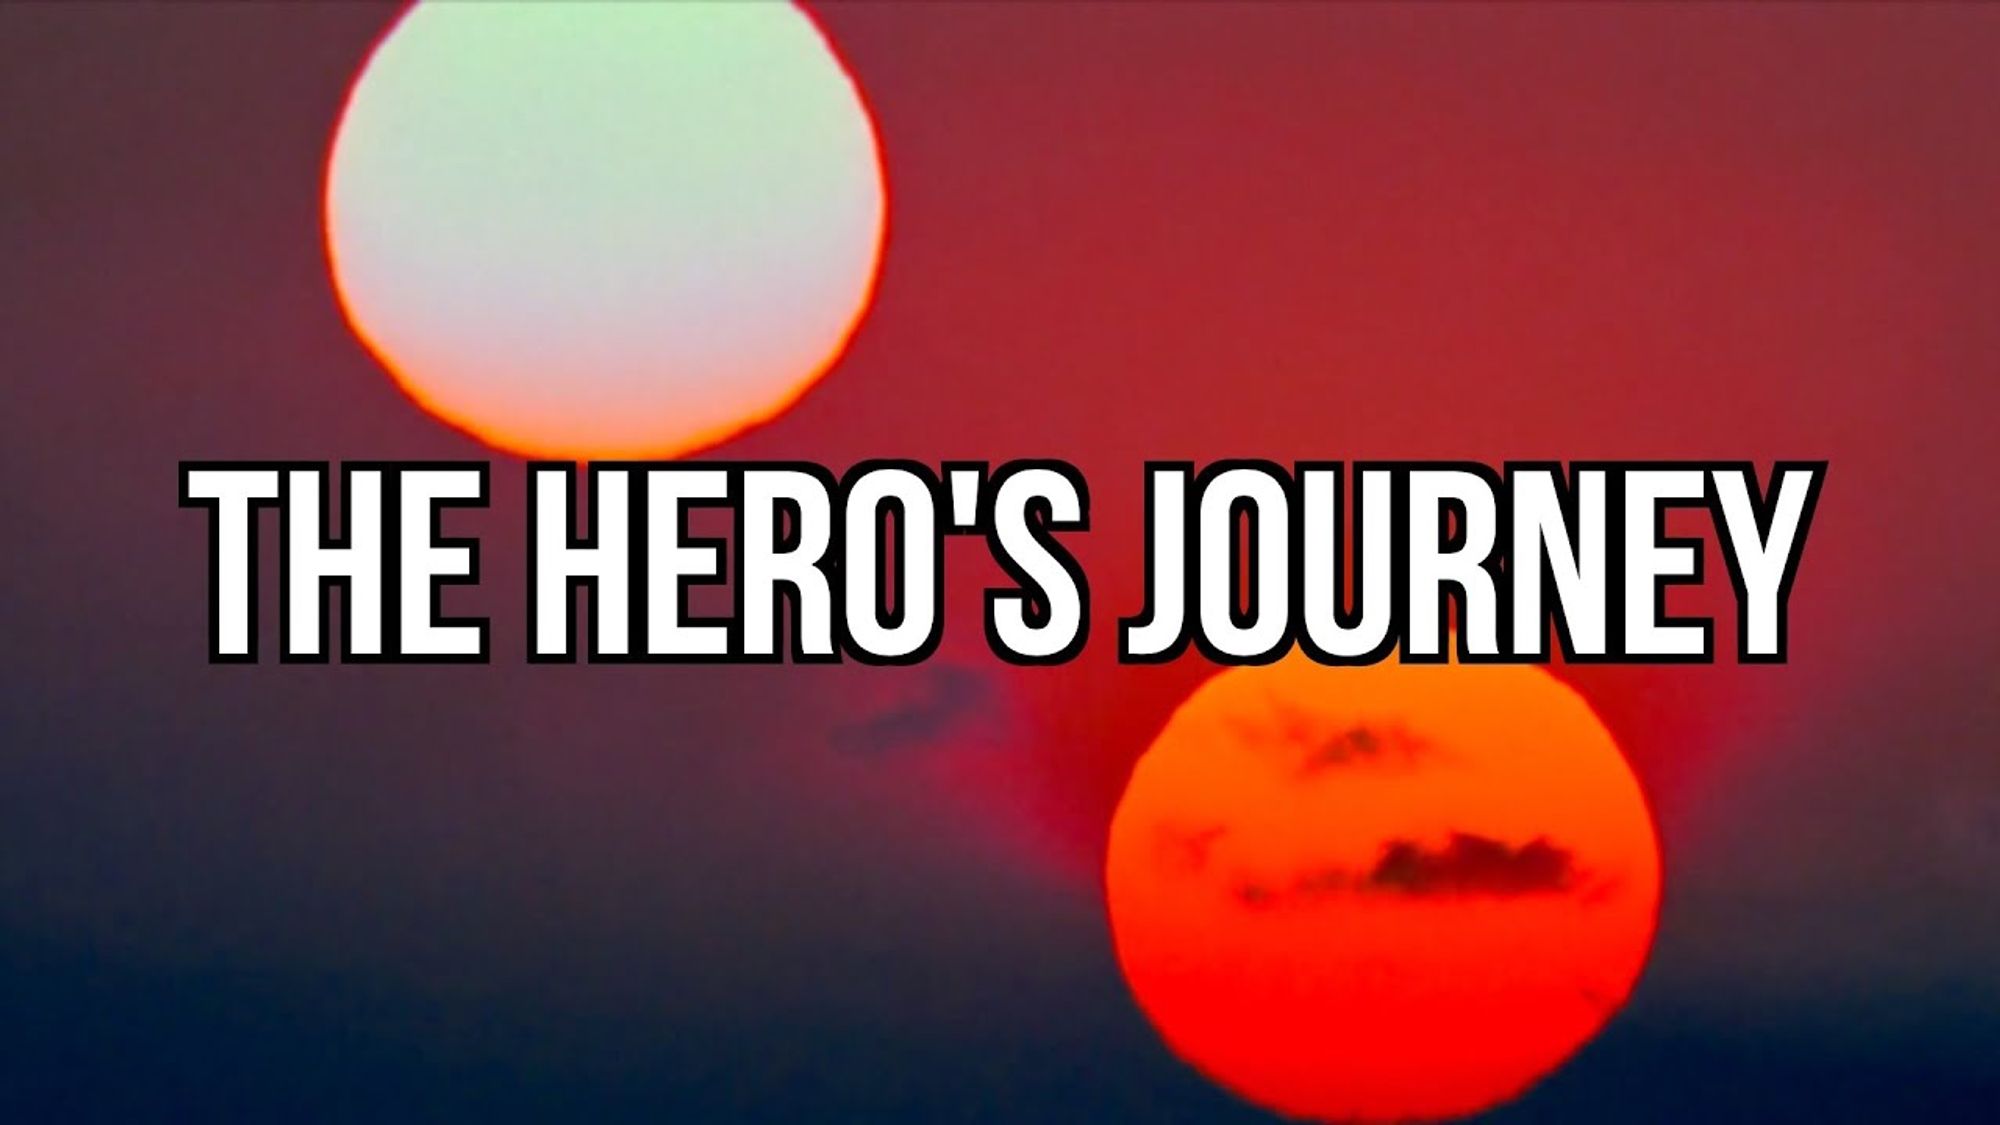 Star Wars and The Hero's Journey